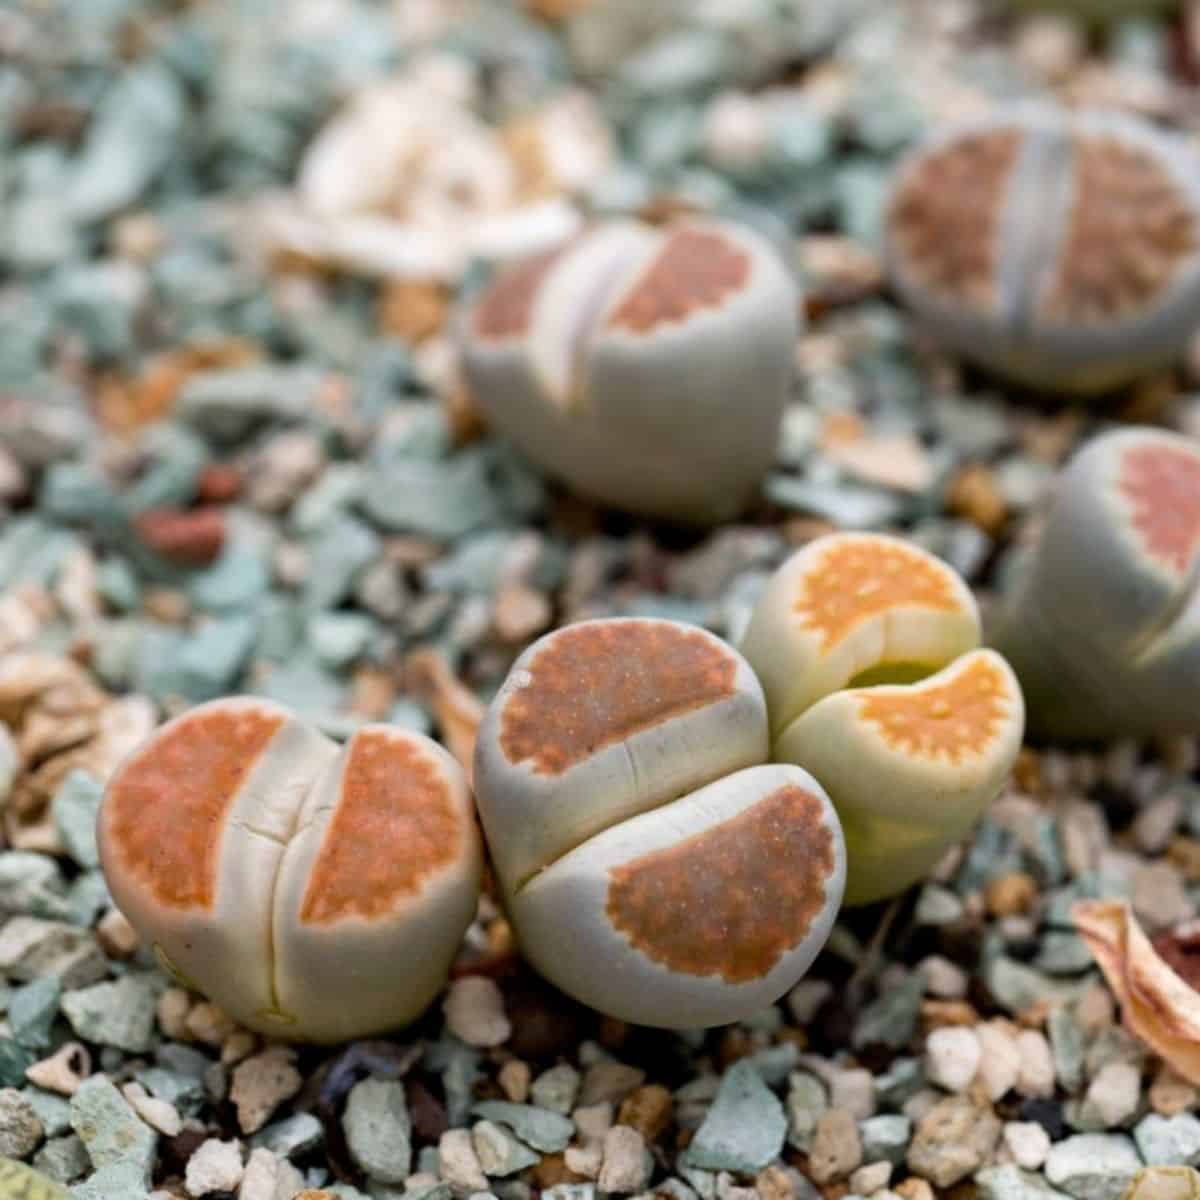 Lithops in rocky soil close-up.